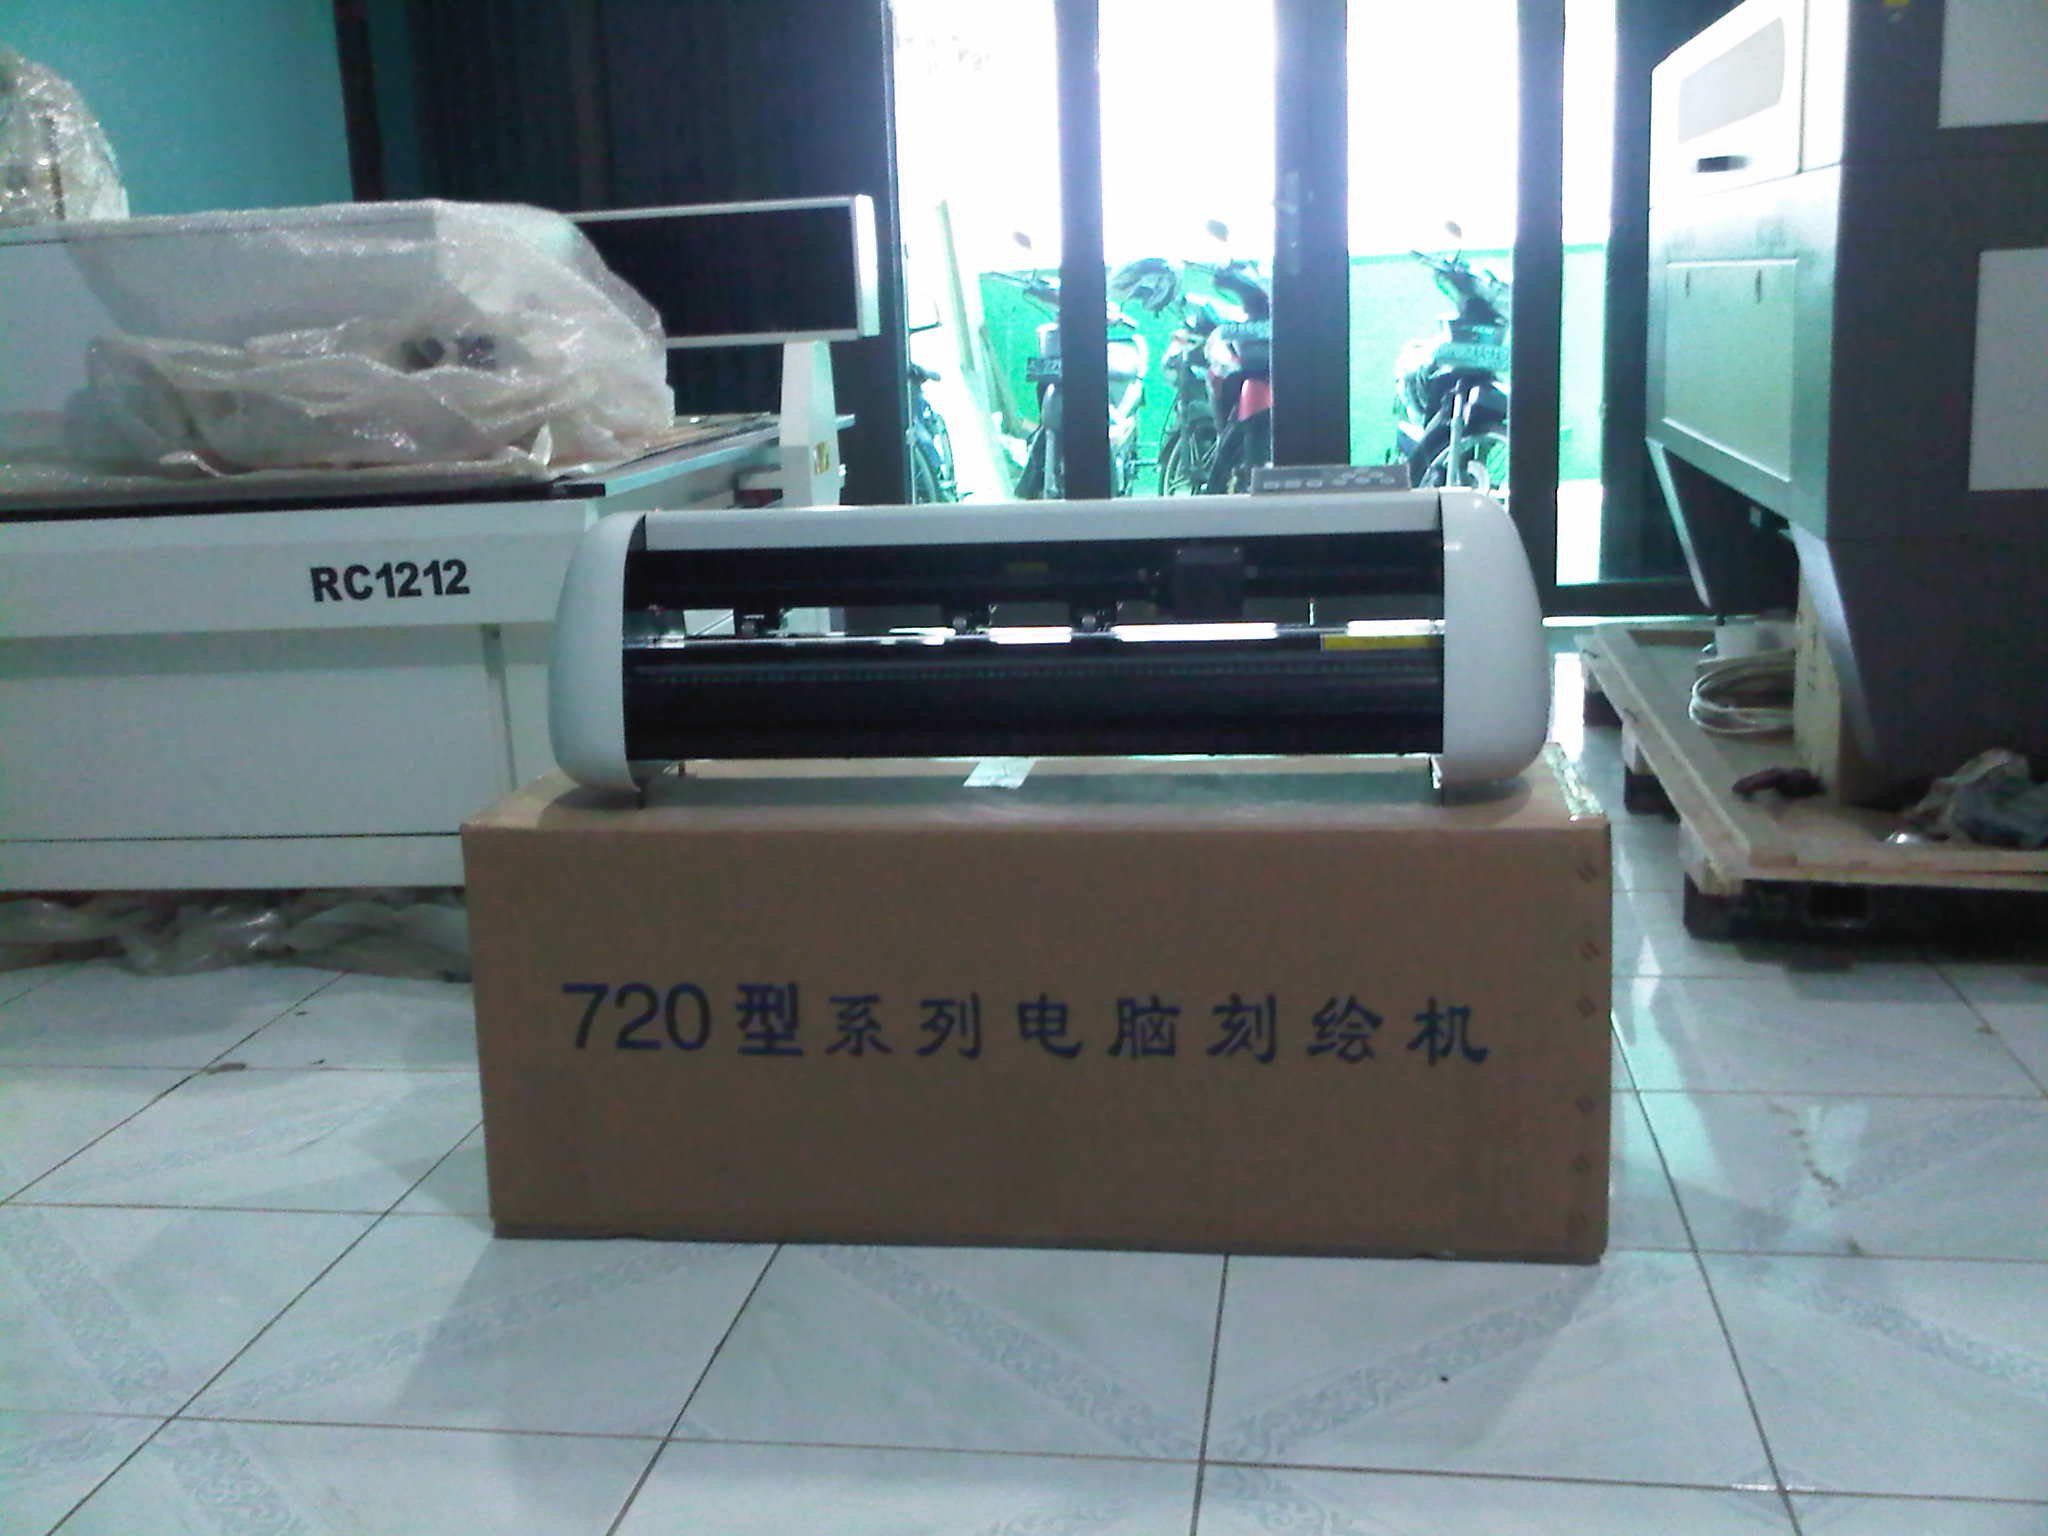 CNC Router, Laser and cutting plotter machine